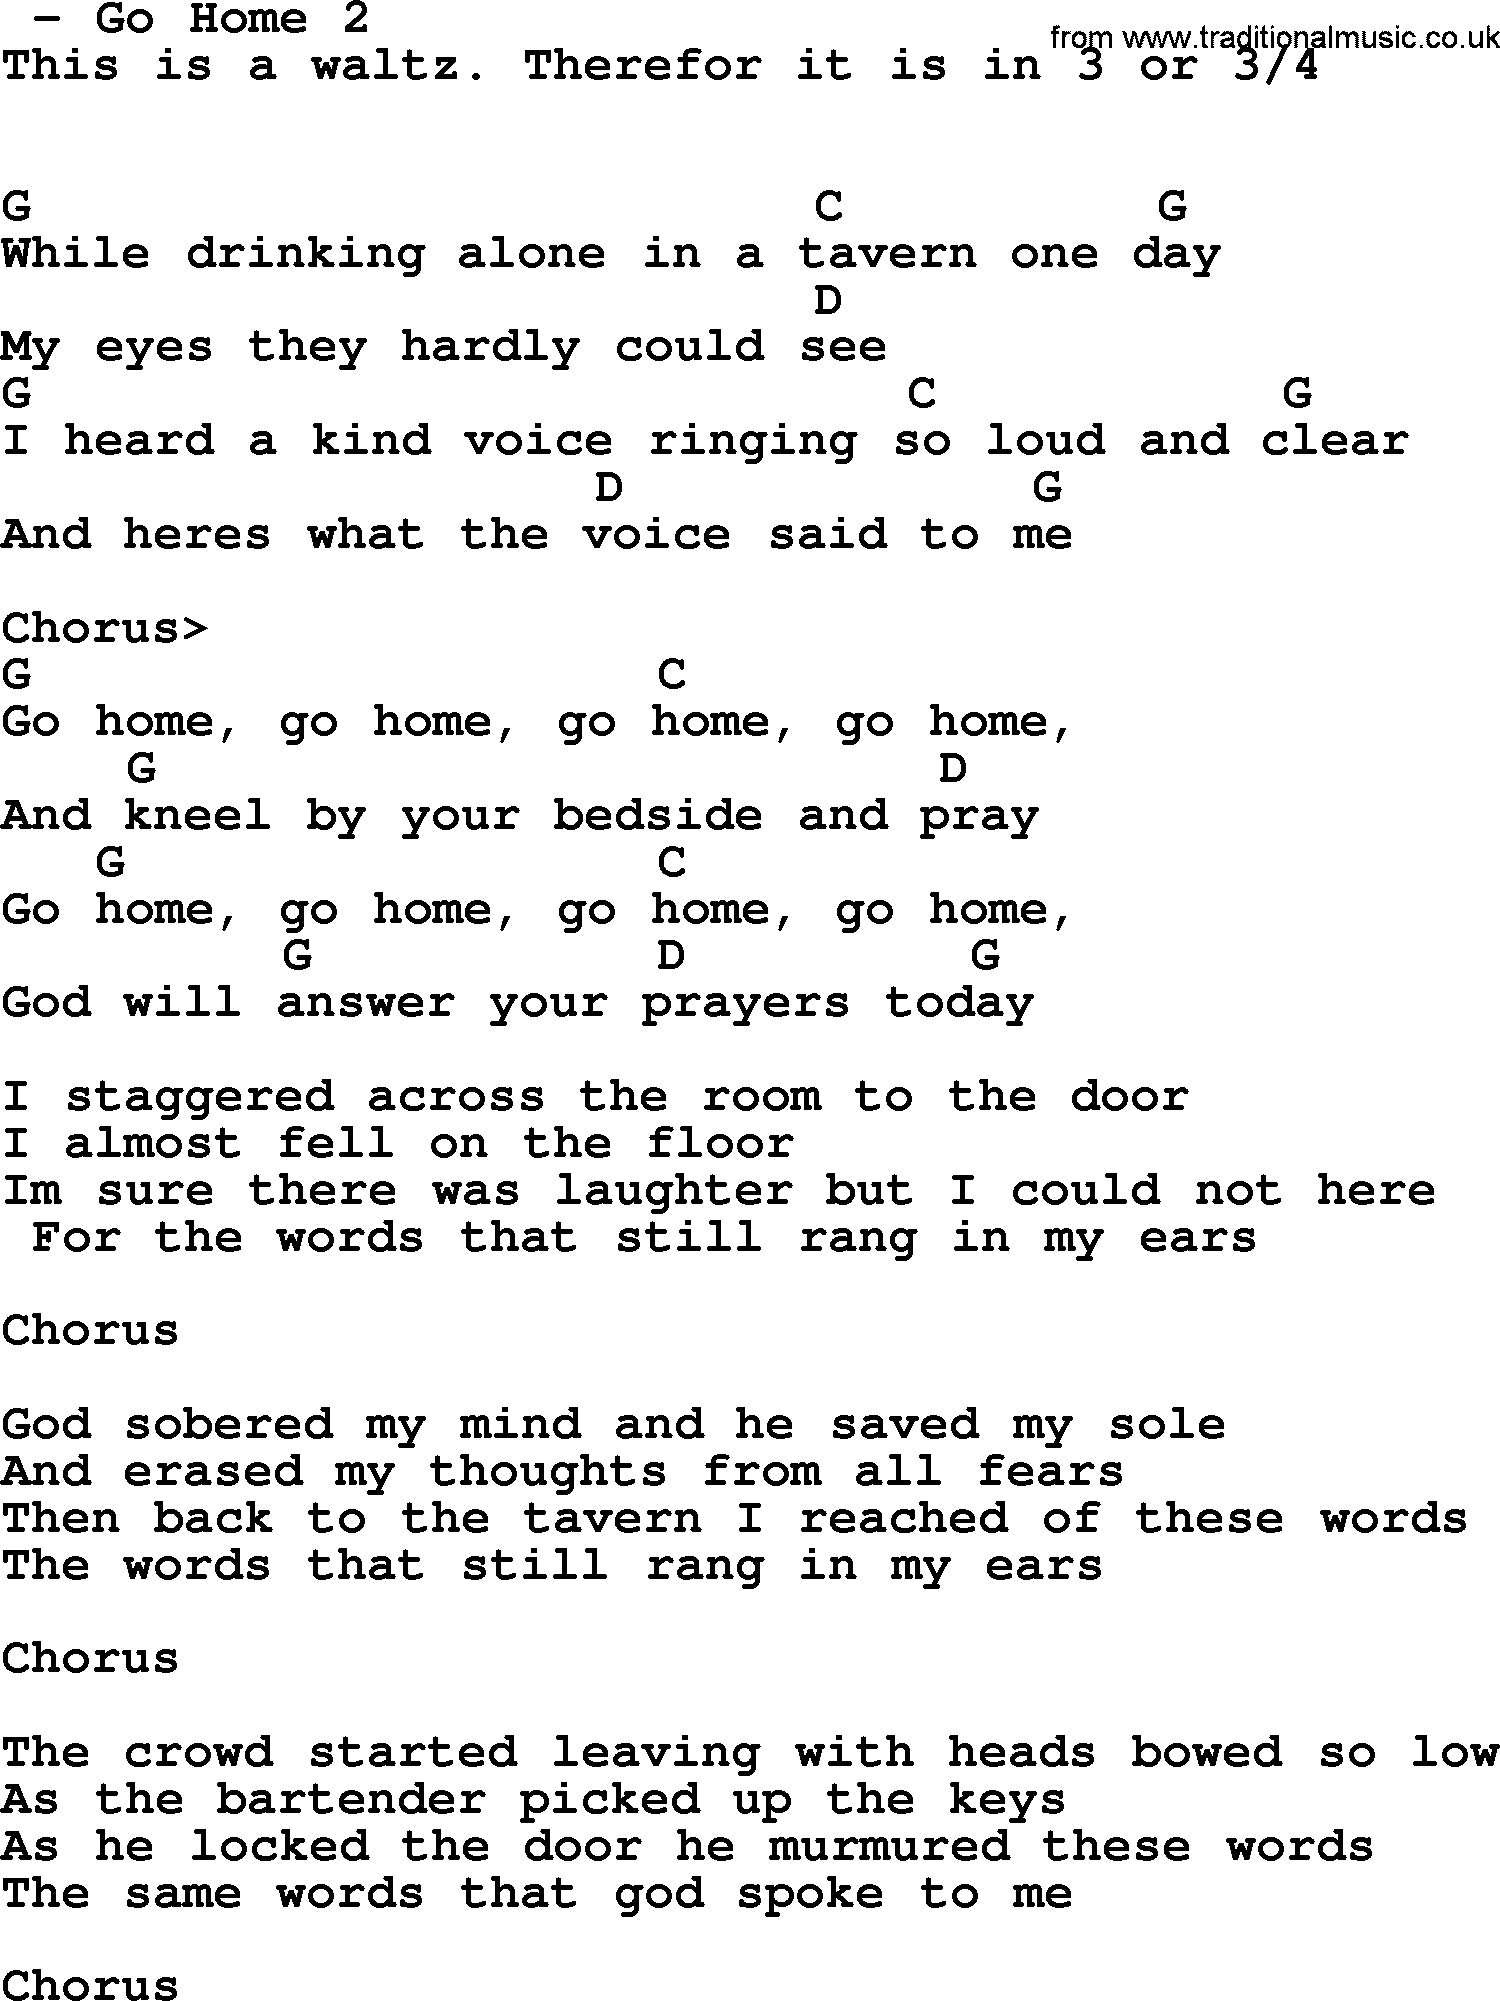 Bluegrass song: Go Home 2, lyrics and chords